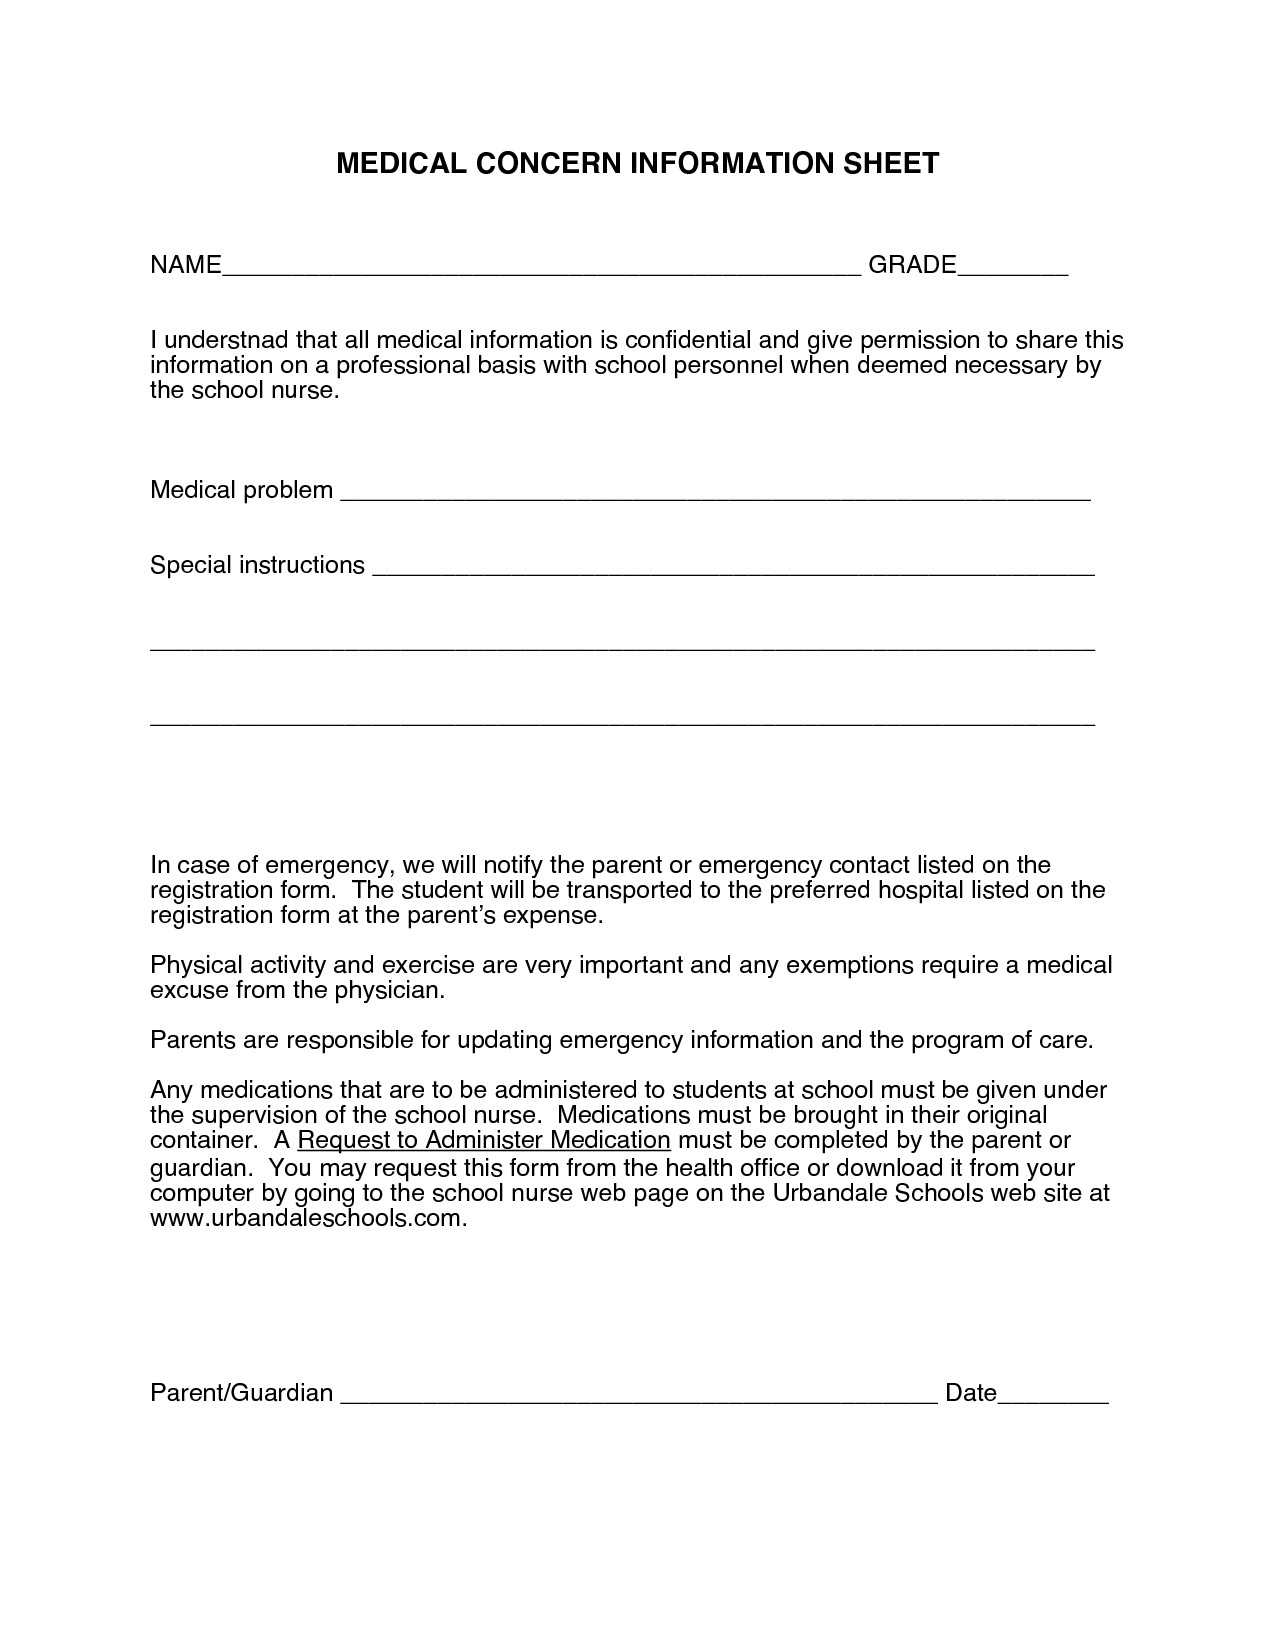 guardianship-letter-in-case-of-death-template-examples-letter